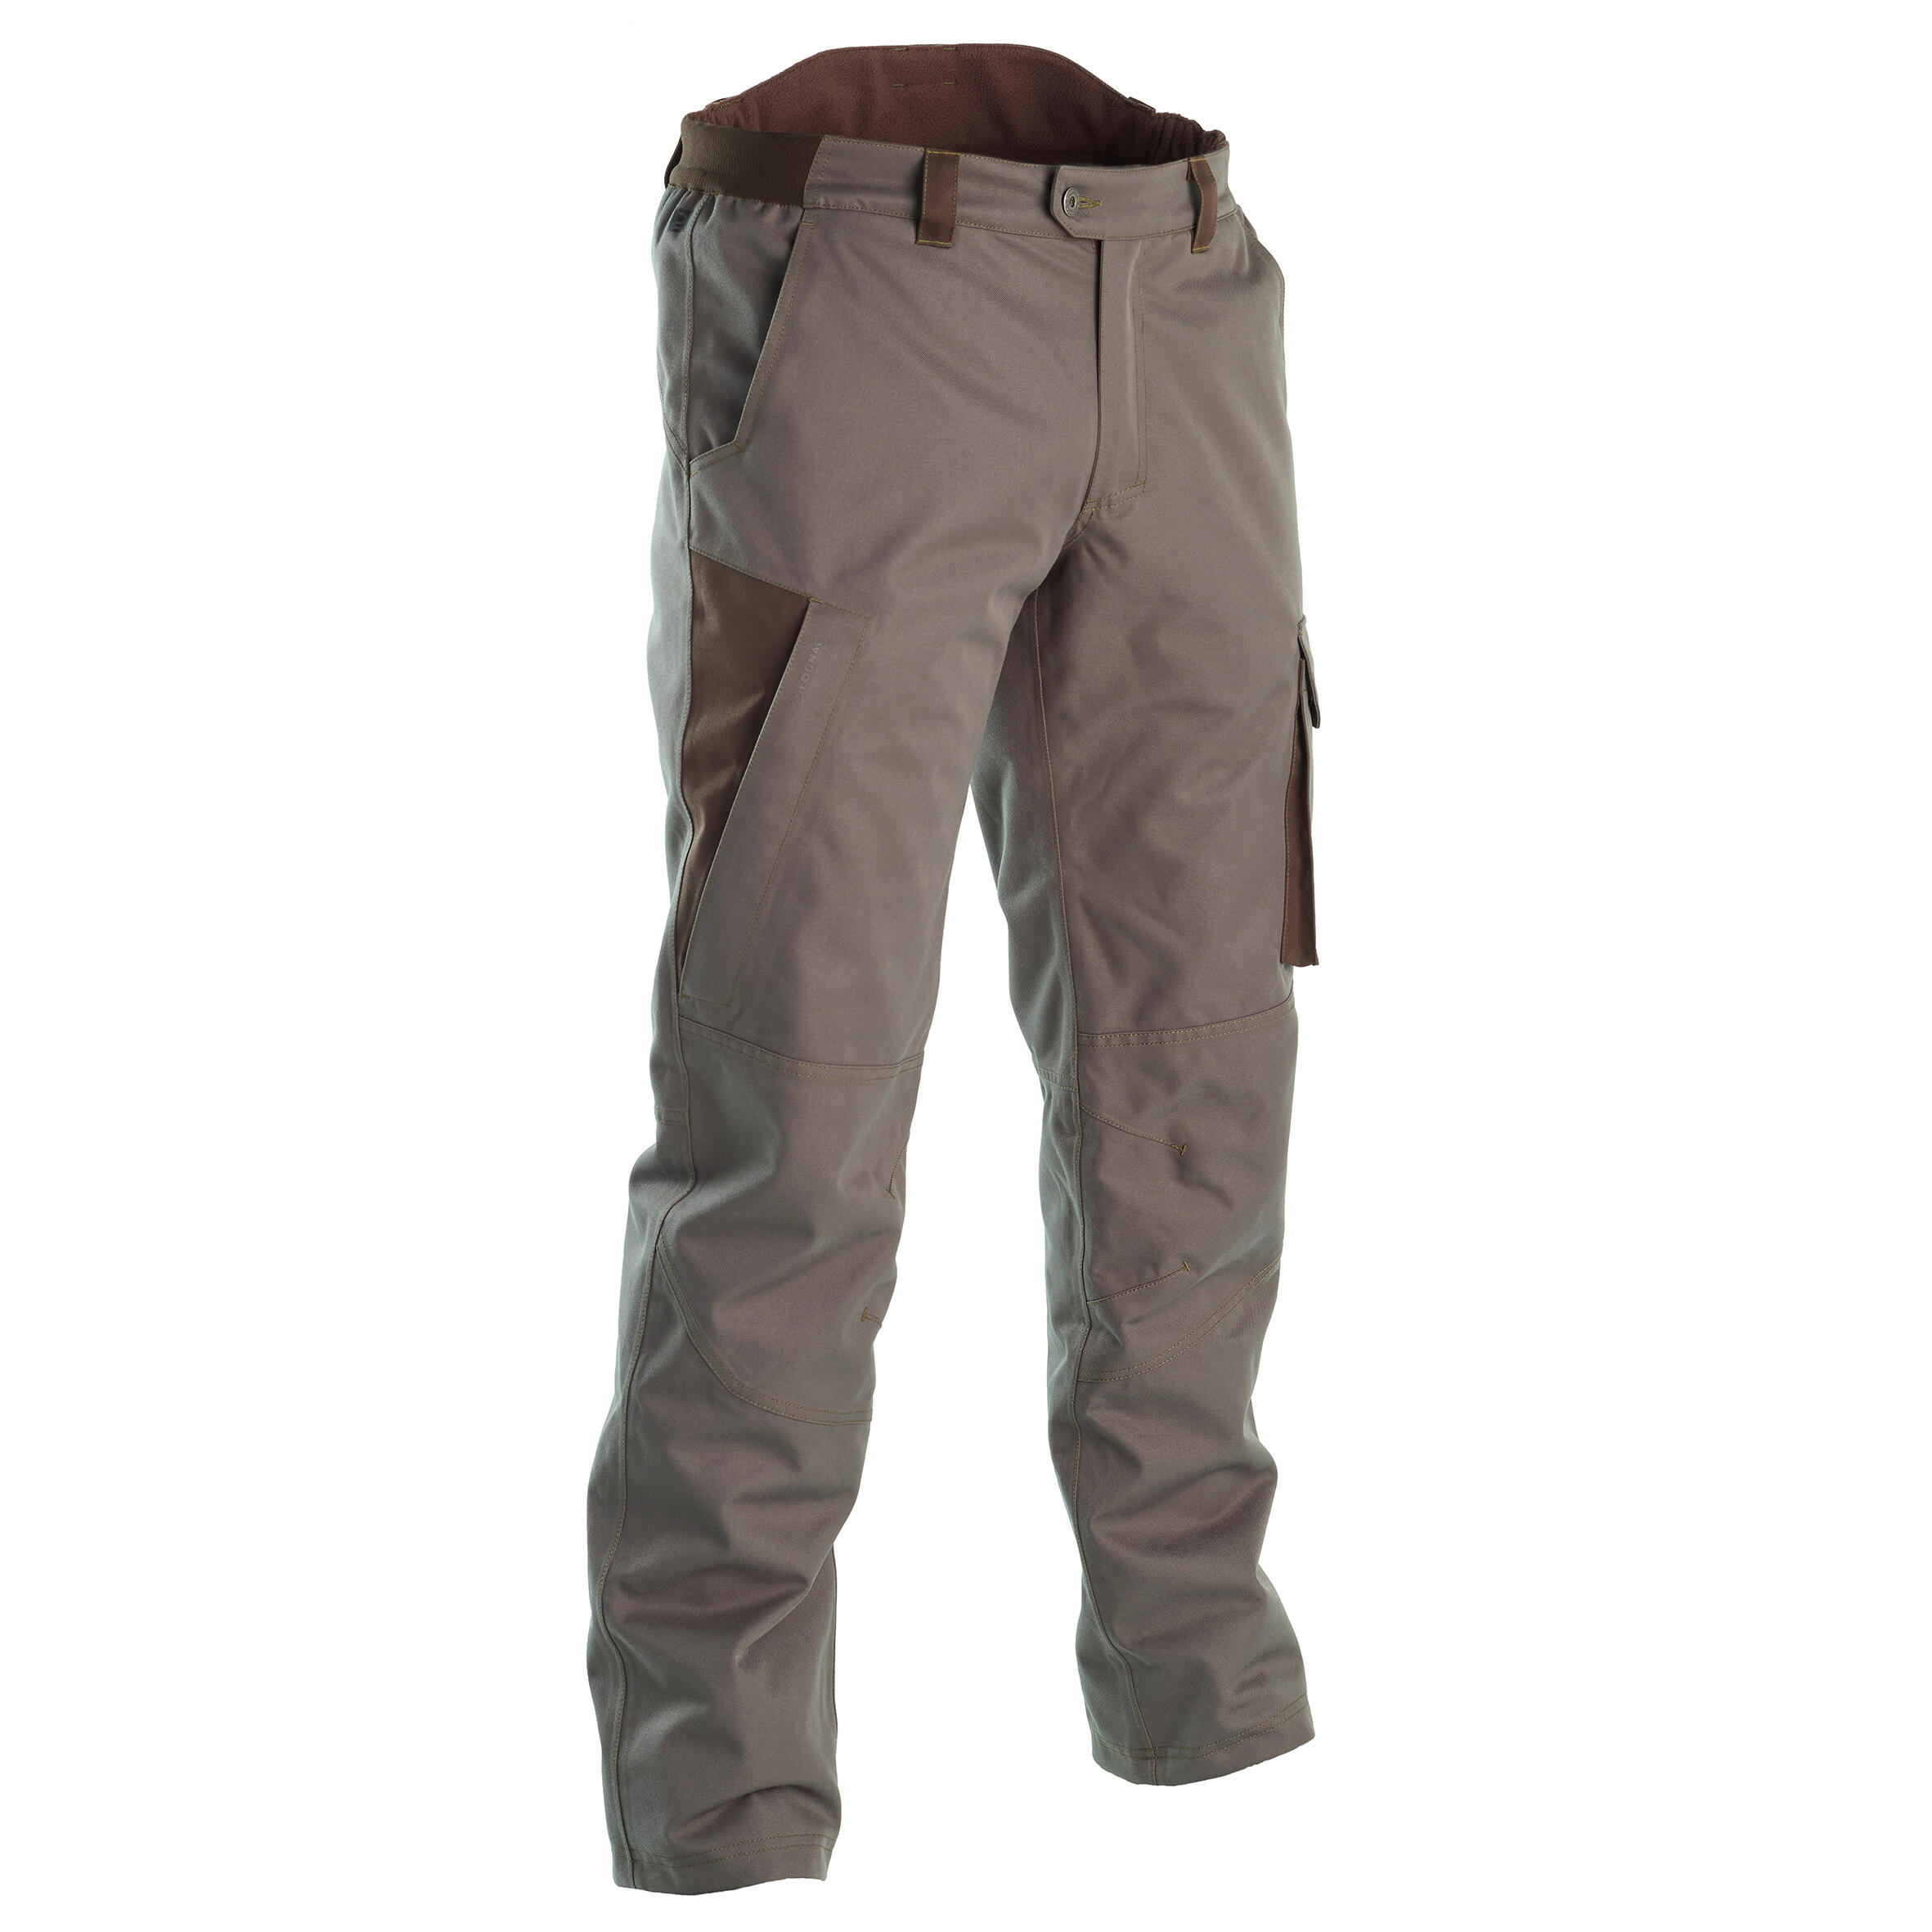 Buy Decathlon Ski Warm White Trousers from the Next UK online shop